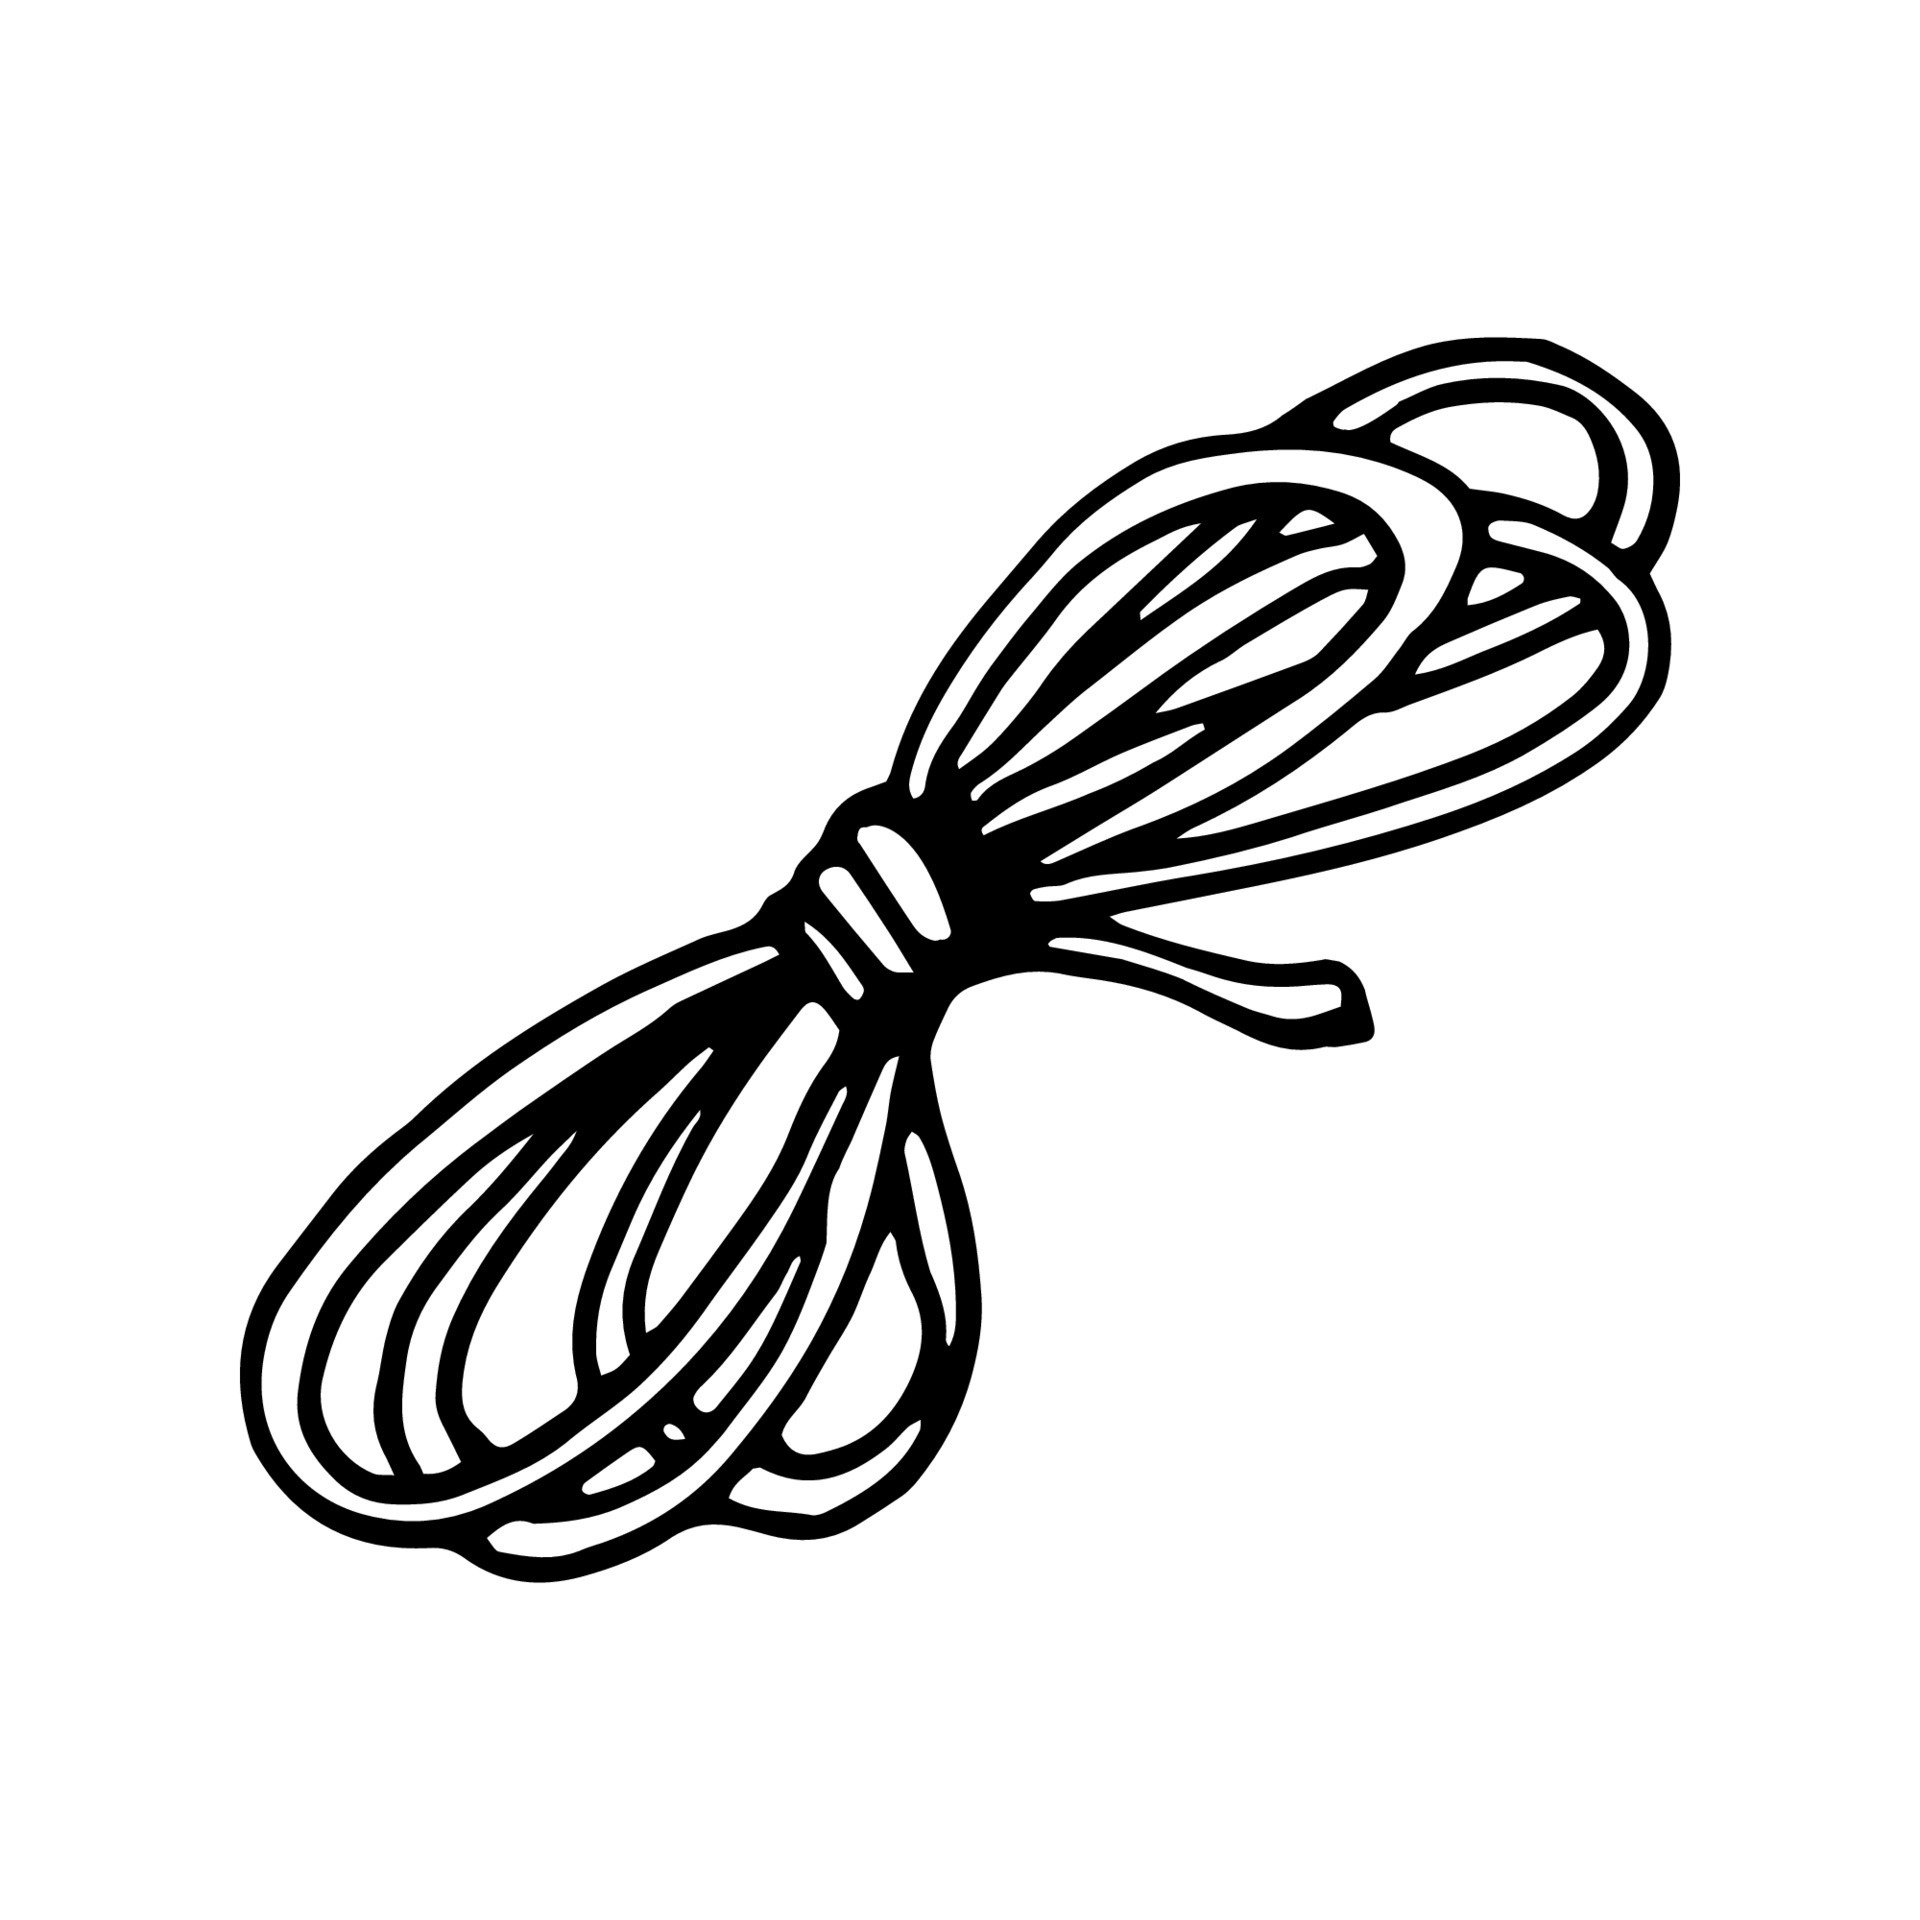 Hand drawn vector camping climbing rope clipart. Isolated on white